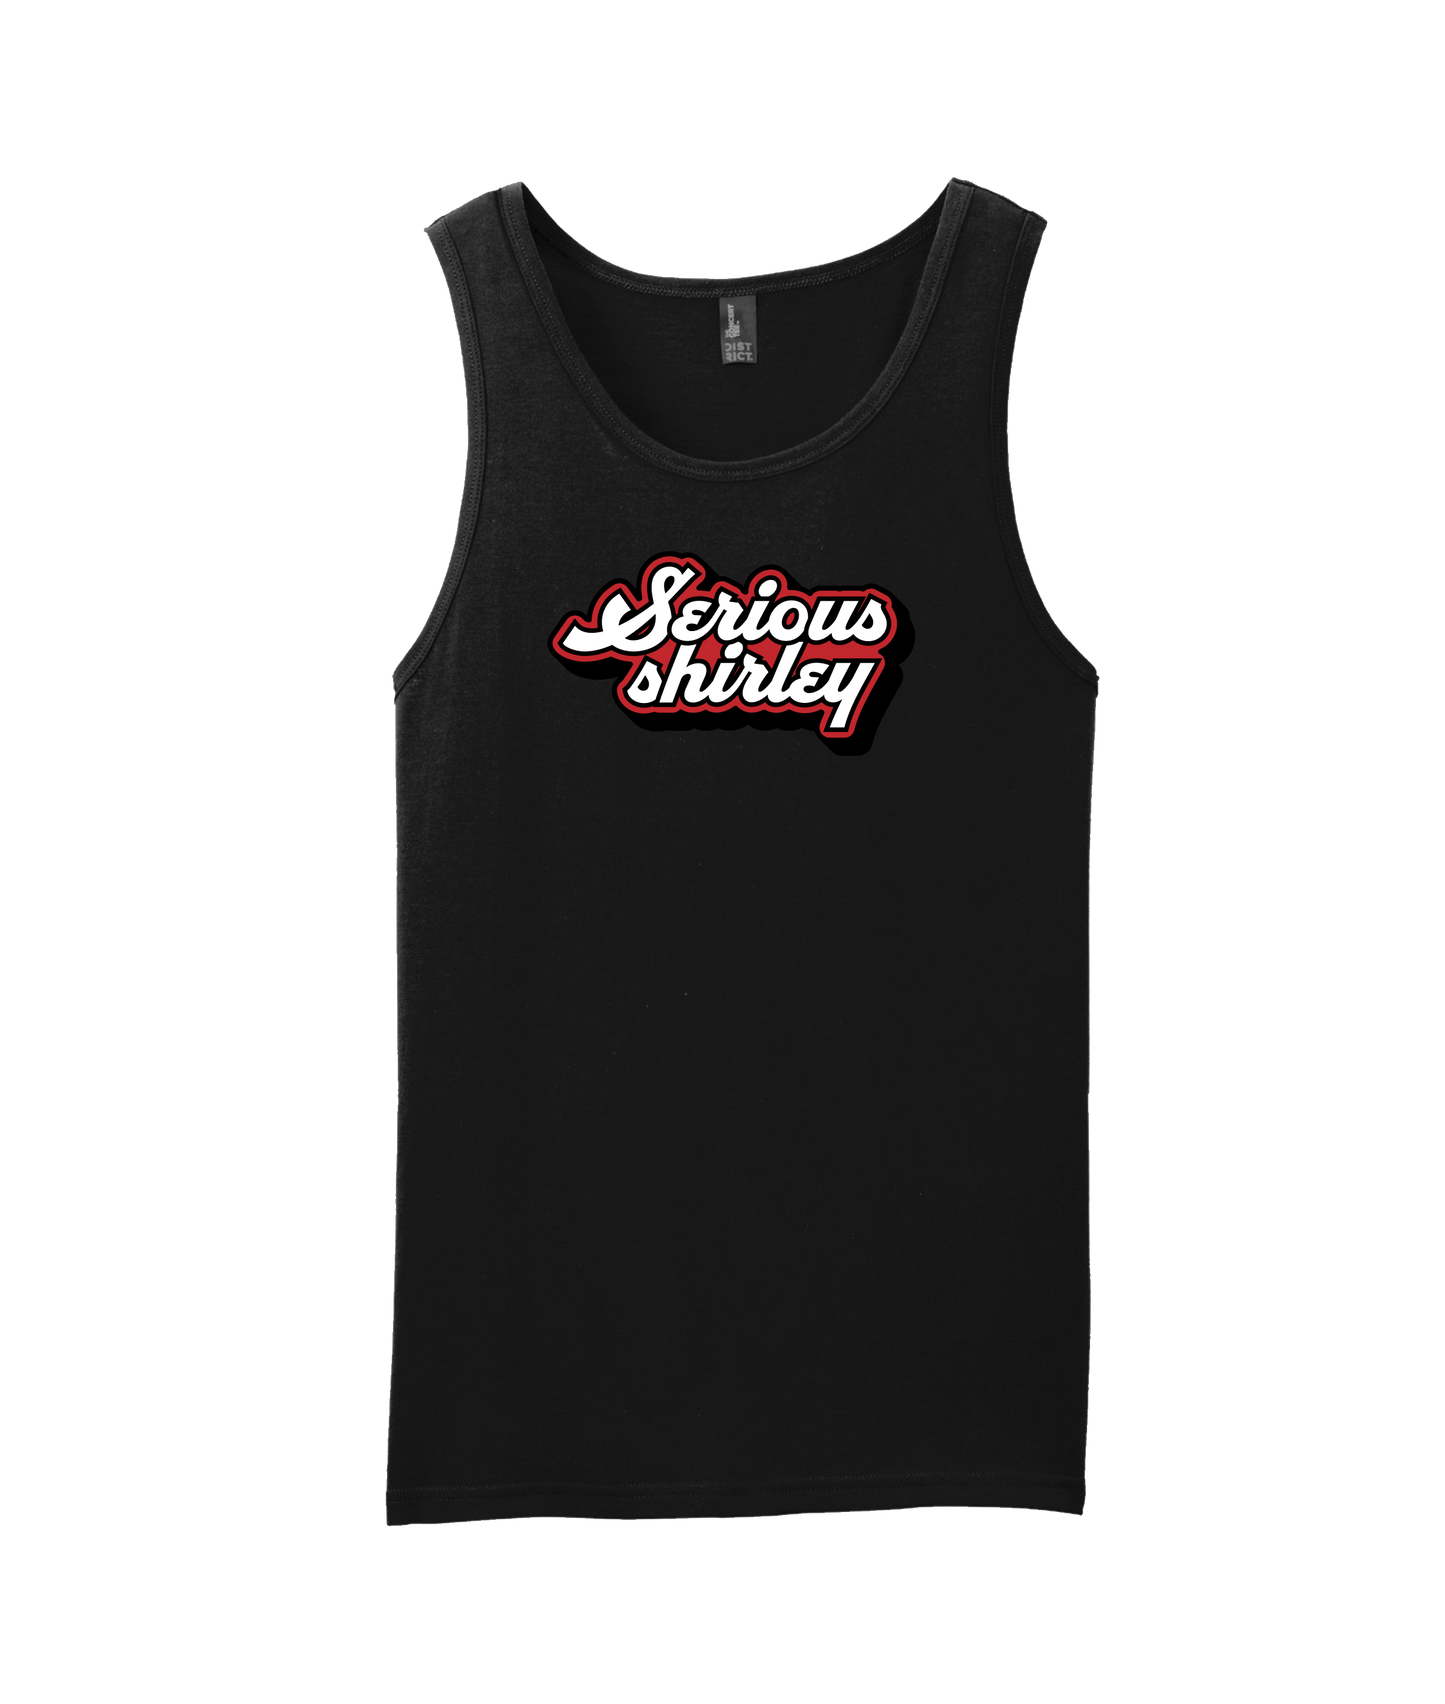 Serious Shirley - Red and White Logo - Black Tank Top